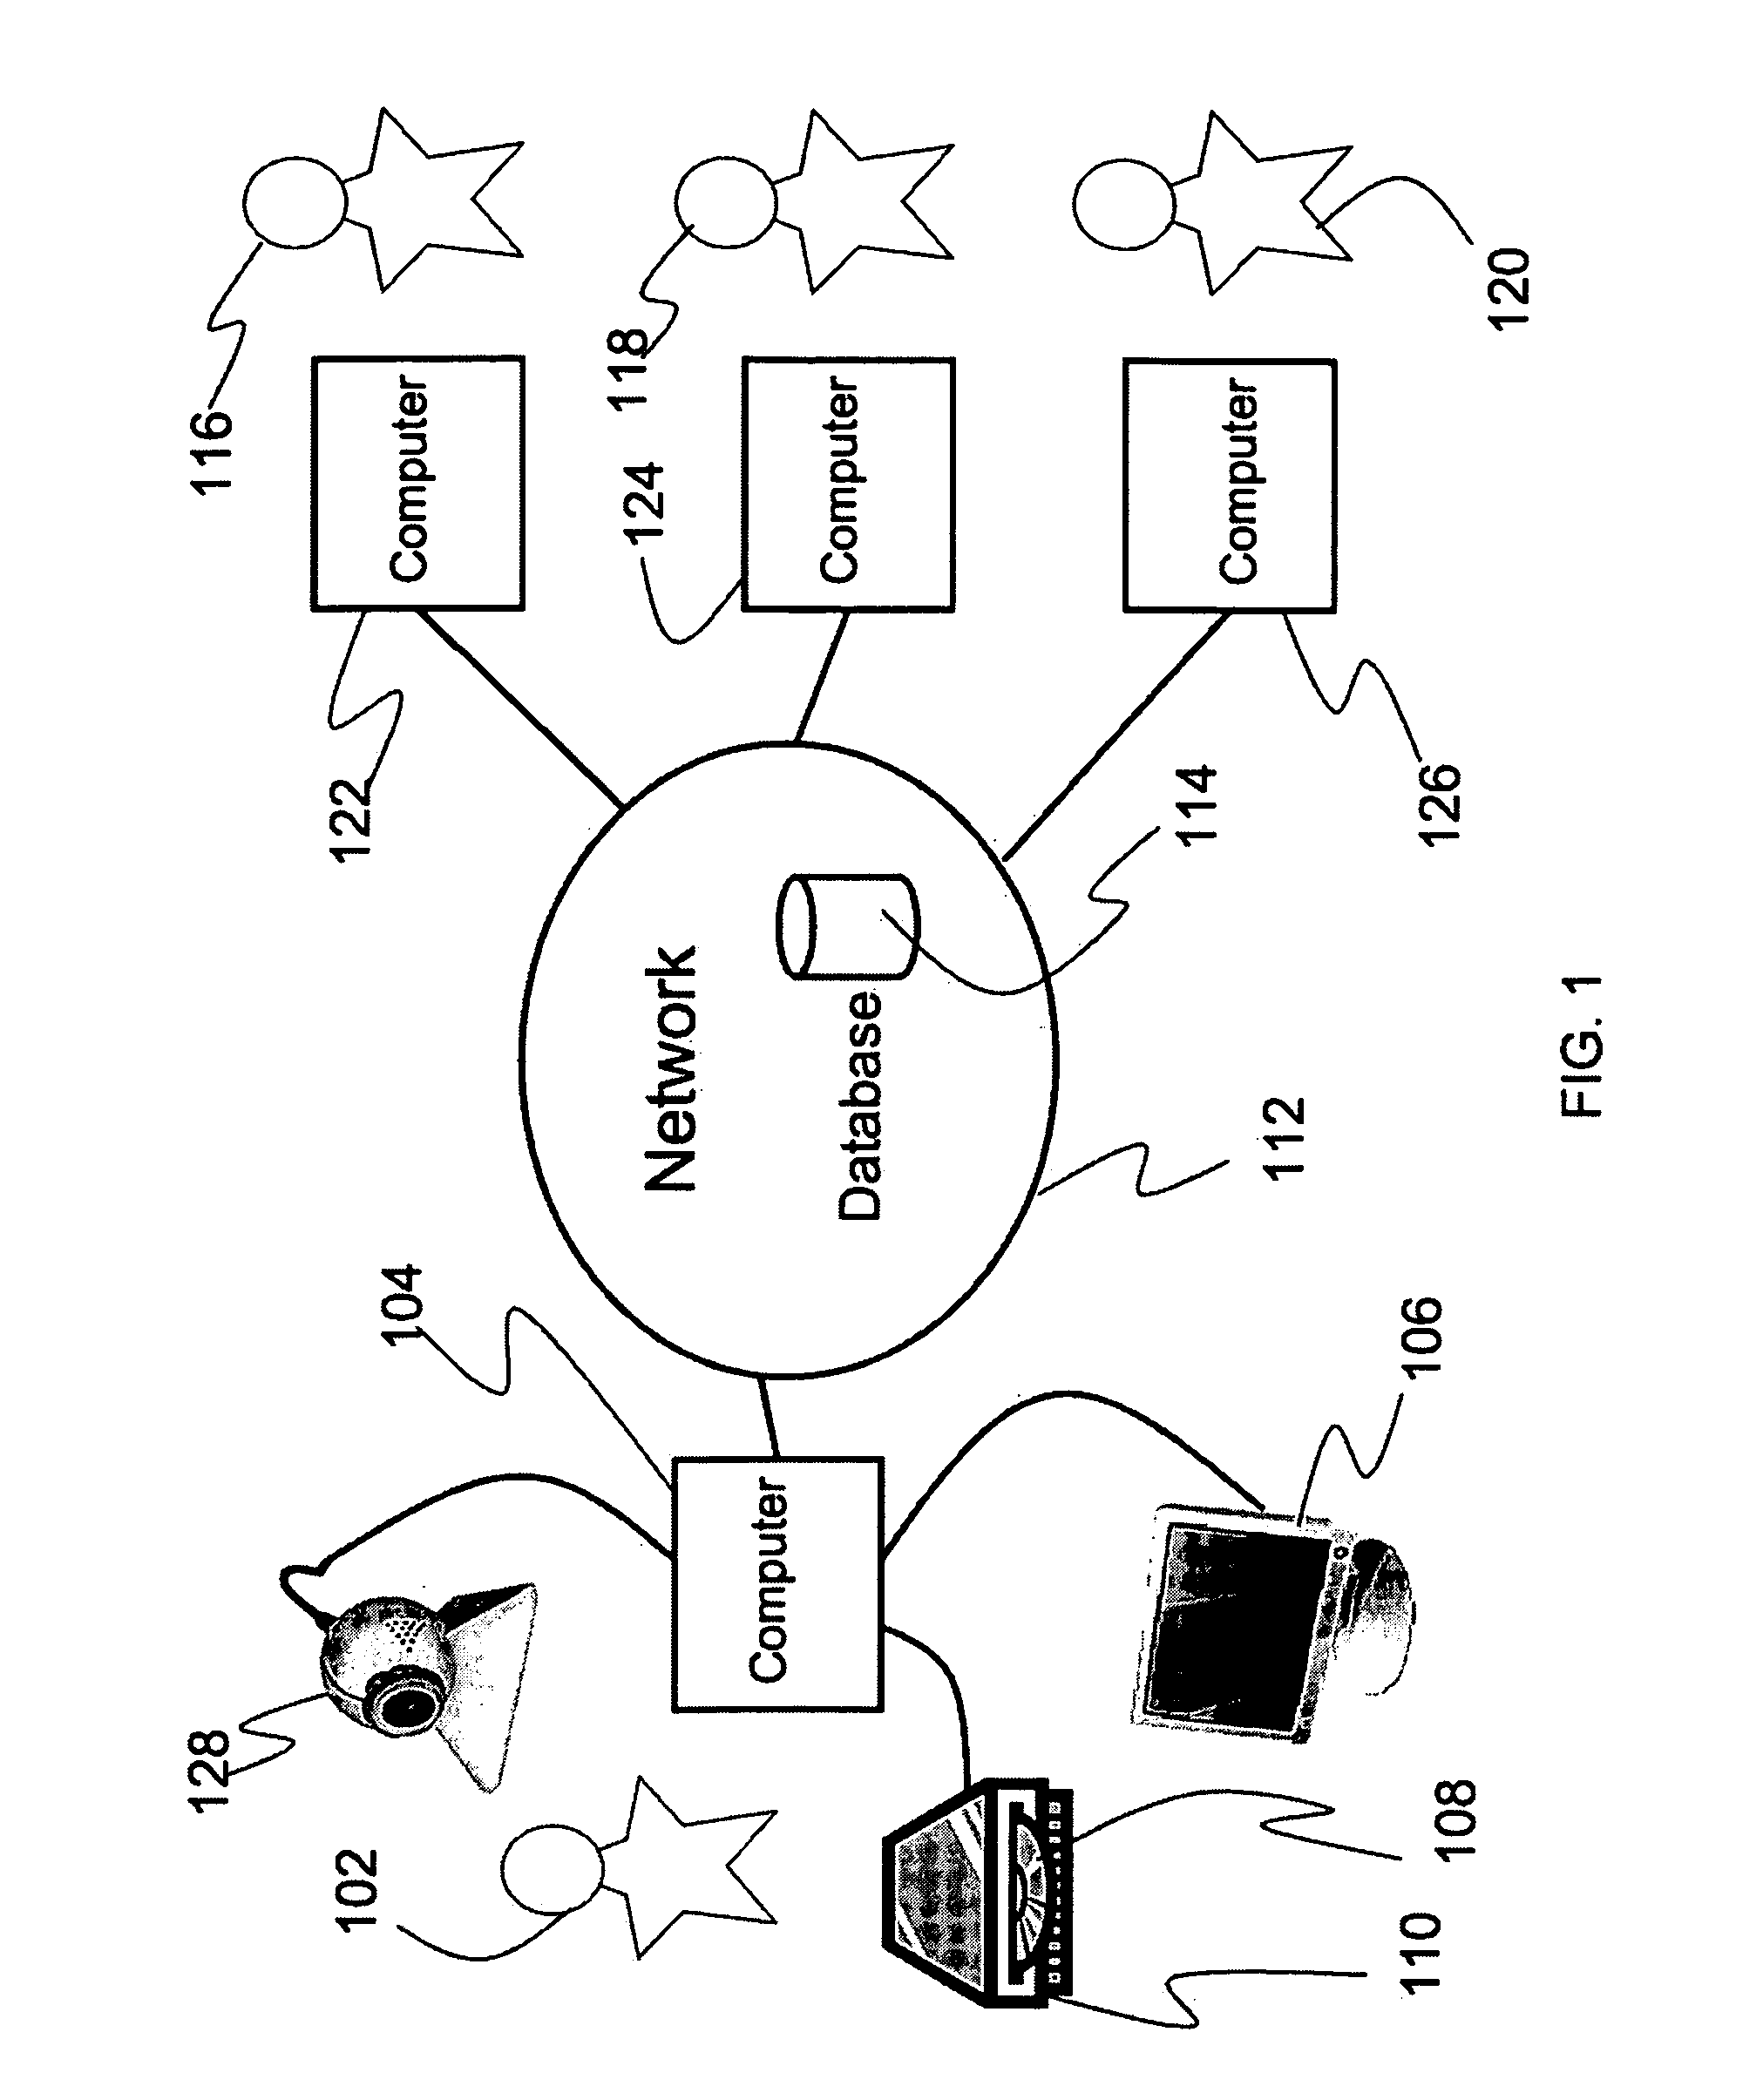 System, method and computer program product for interacting with unaltered media